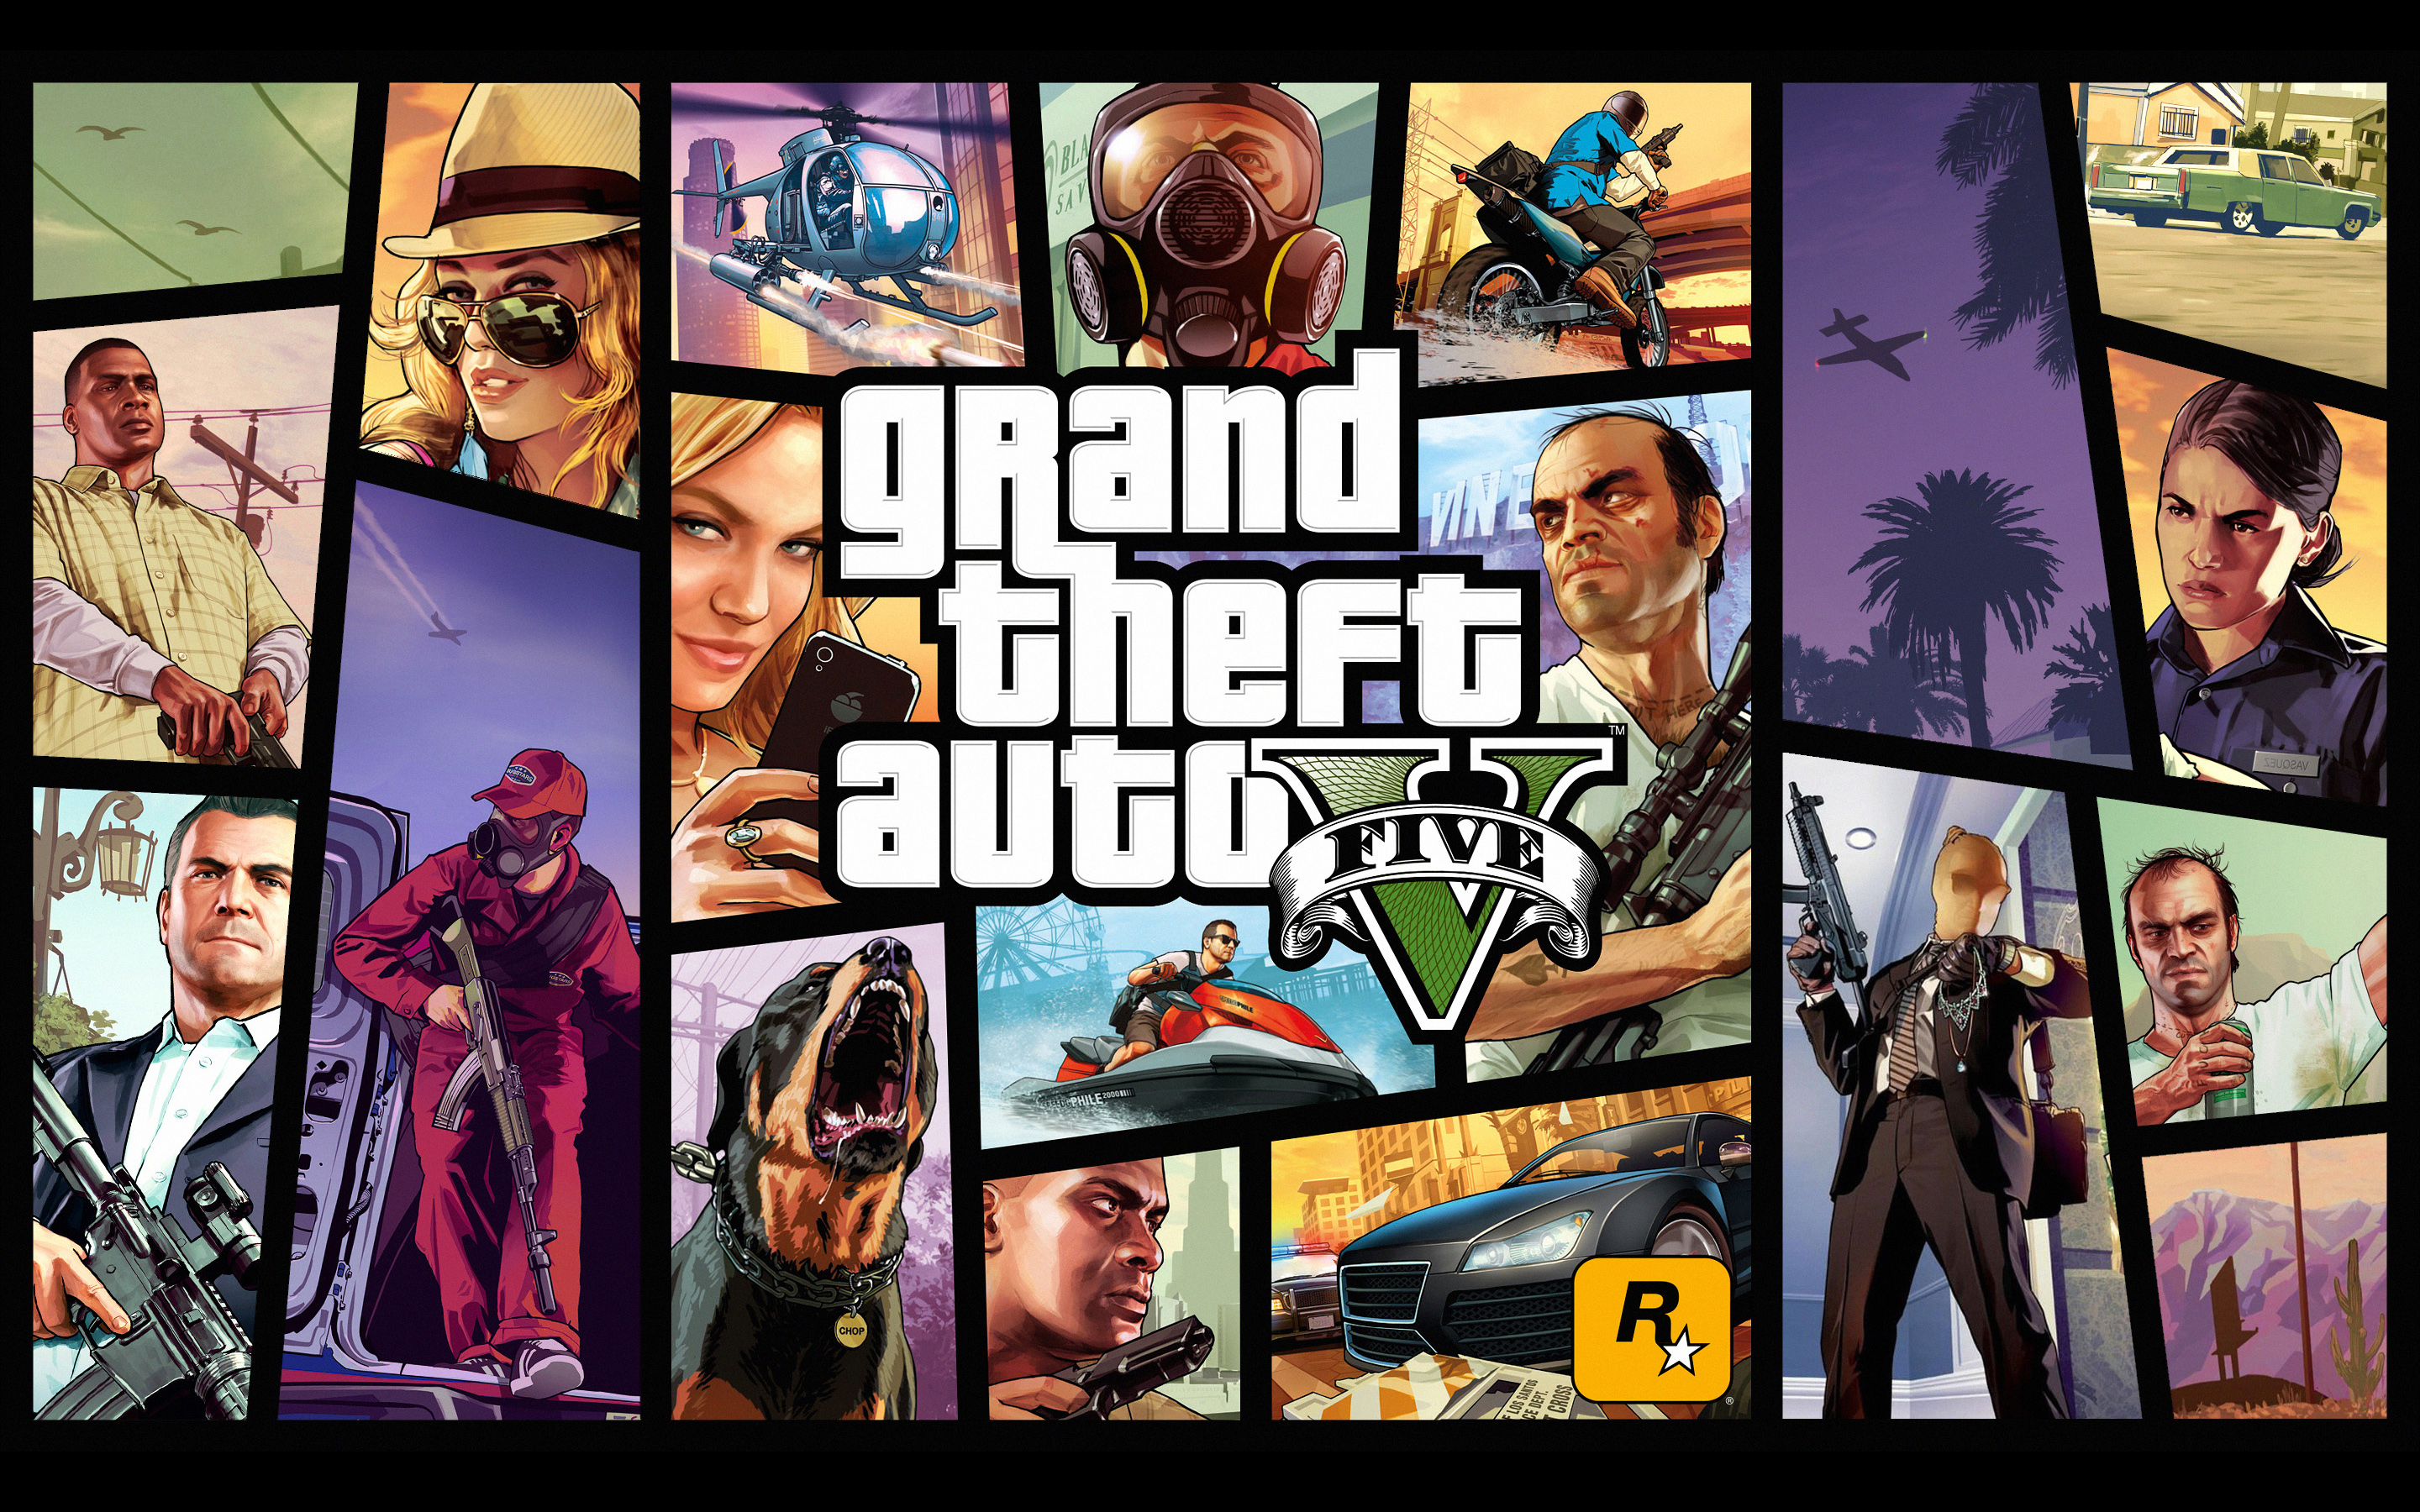 Gta 5 Wallpapers, Pictures, Images